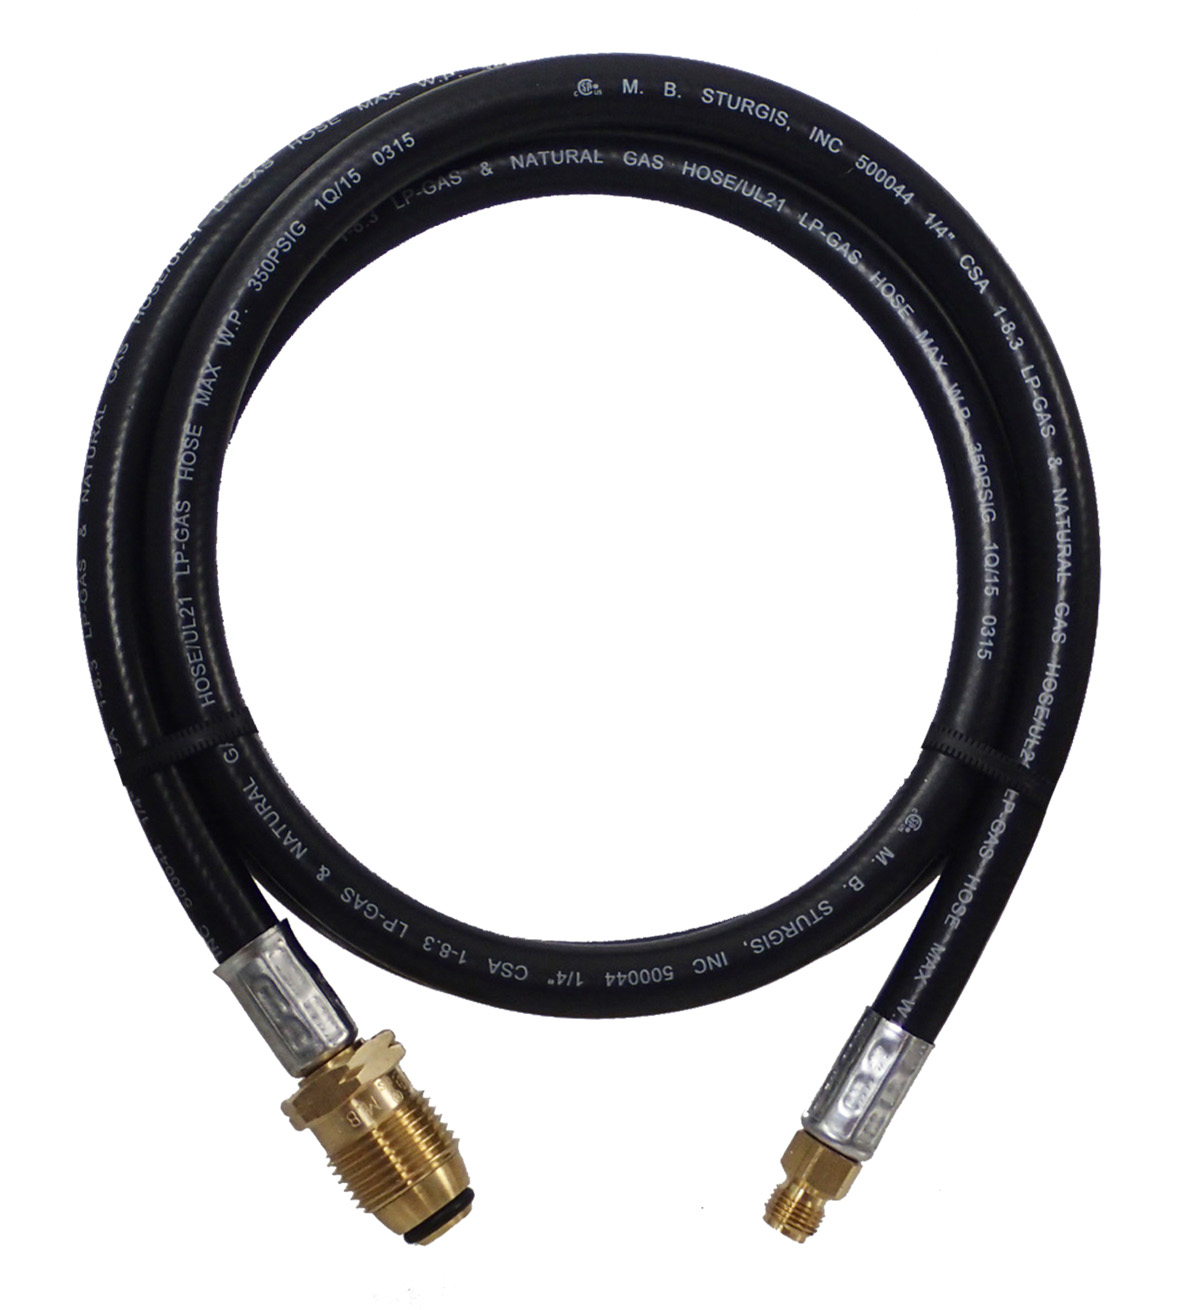 PIGTAIL MALE POL TO MALE POL PIG TAIL PROPANE LPG BBQ GRILL RUBBER HOSE 350PSI 